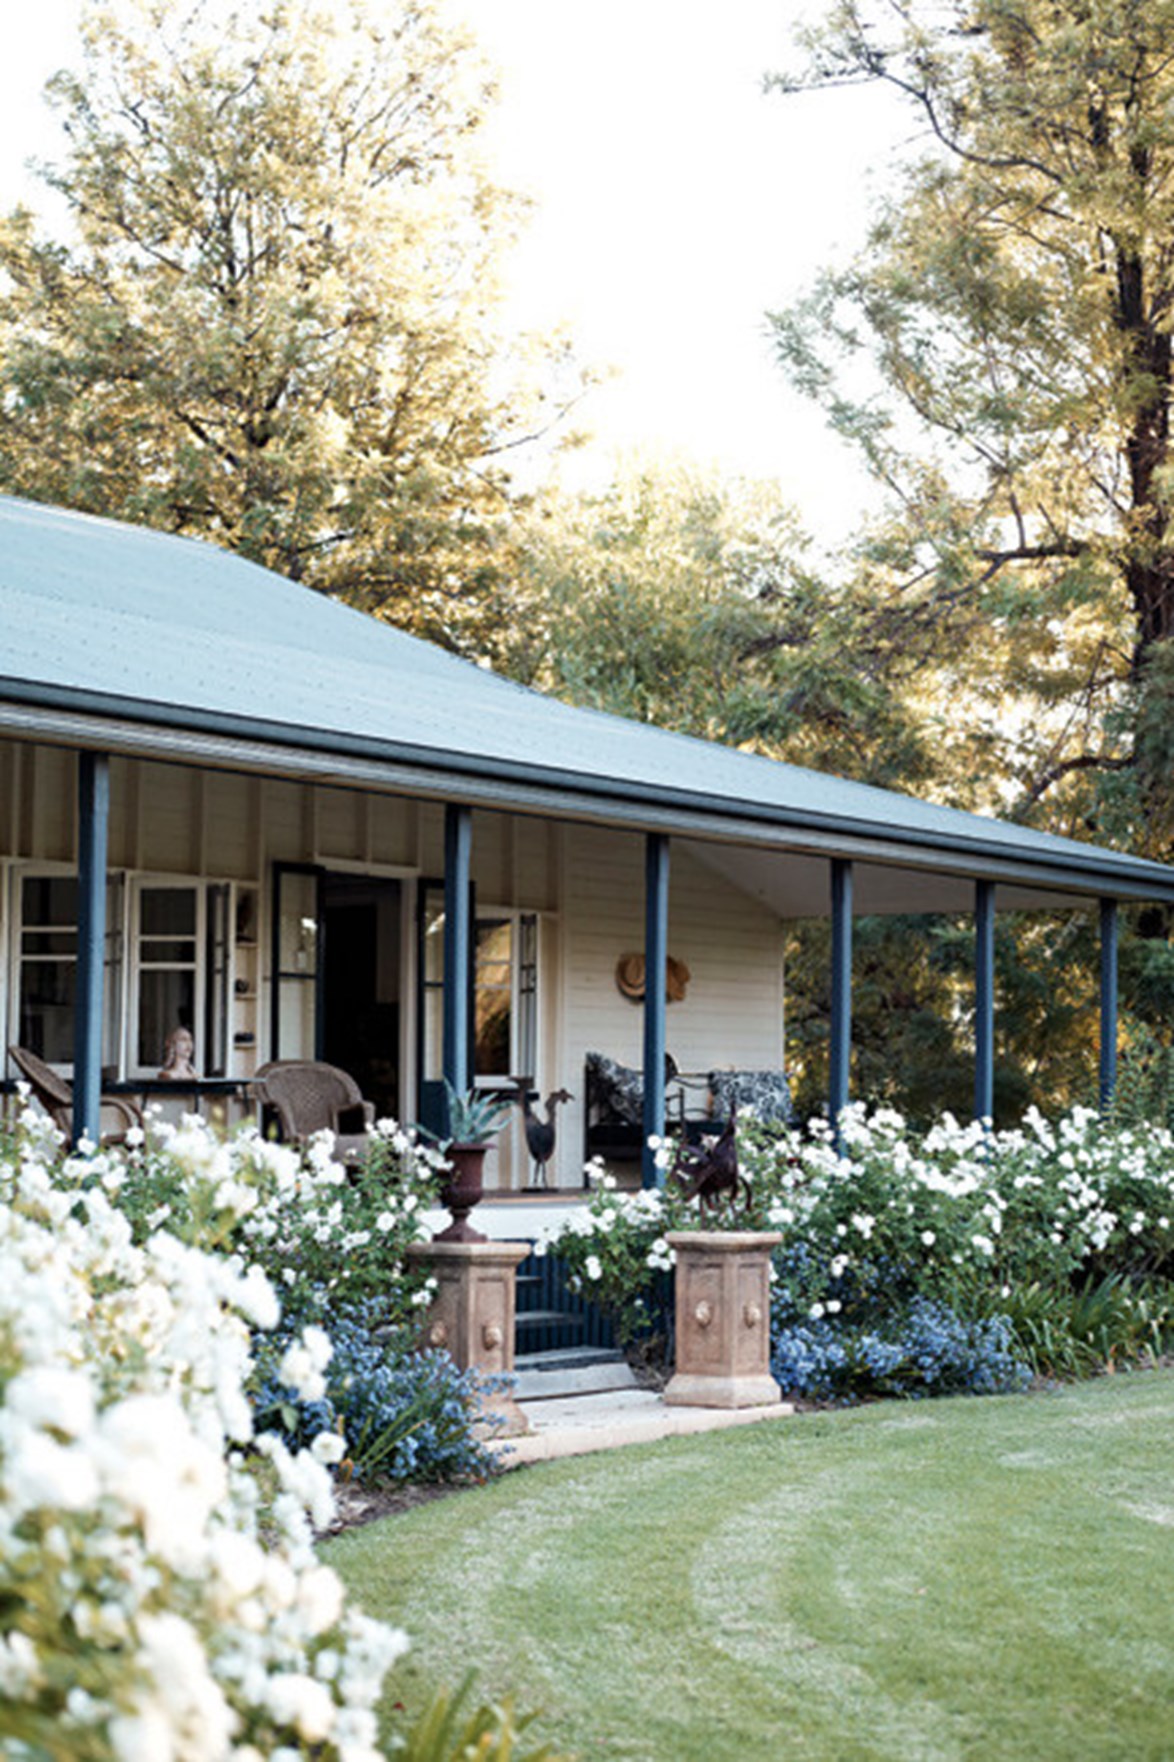 A 1900s [homestead in Queensland](https://www.homestolove.com.au/queensland-country-garden-13018|target="_blank") makes a strong first impression with a striking front garden abloom with 'Iceberg' roses. The garden was designed by Megan Turner and her husband Scott, who are often visited by curious emus and other [native birds](https://www.homestolove.com.au/attracting-native-birds-to-your-garden-australia-6368|target="_blank"). *Photo: Jared Fowler*